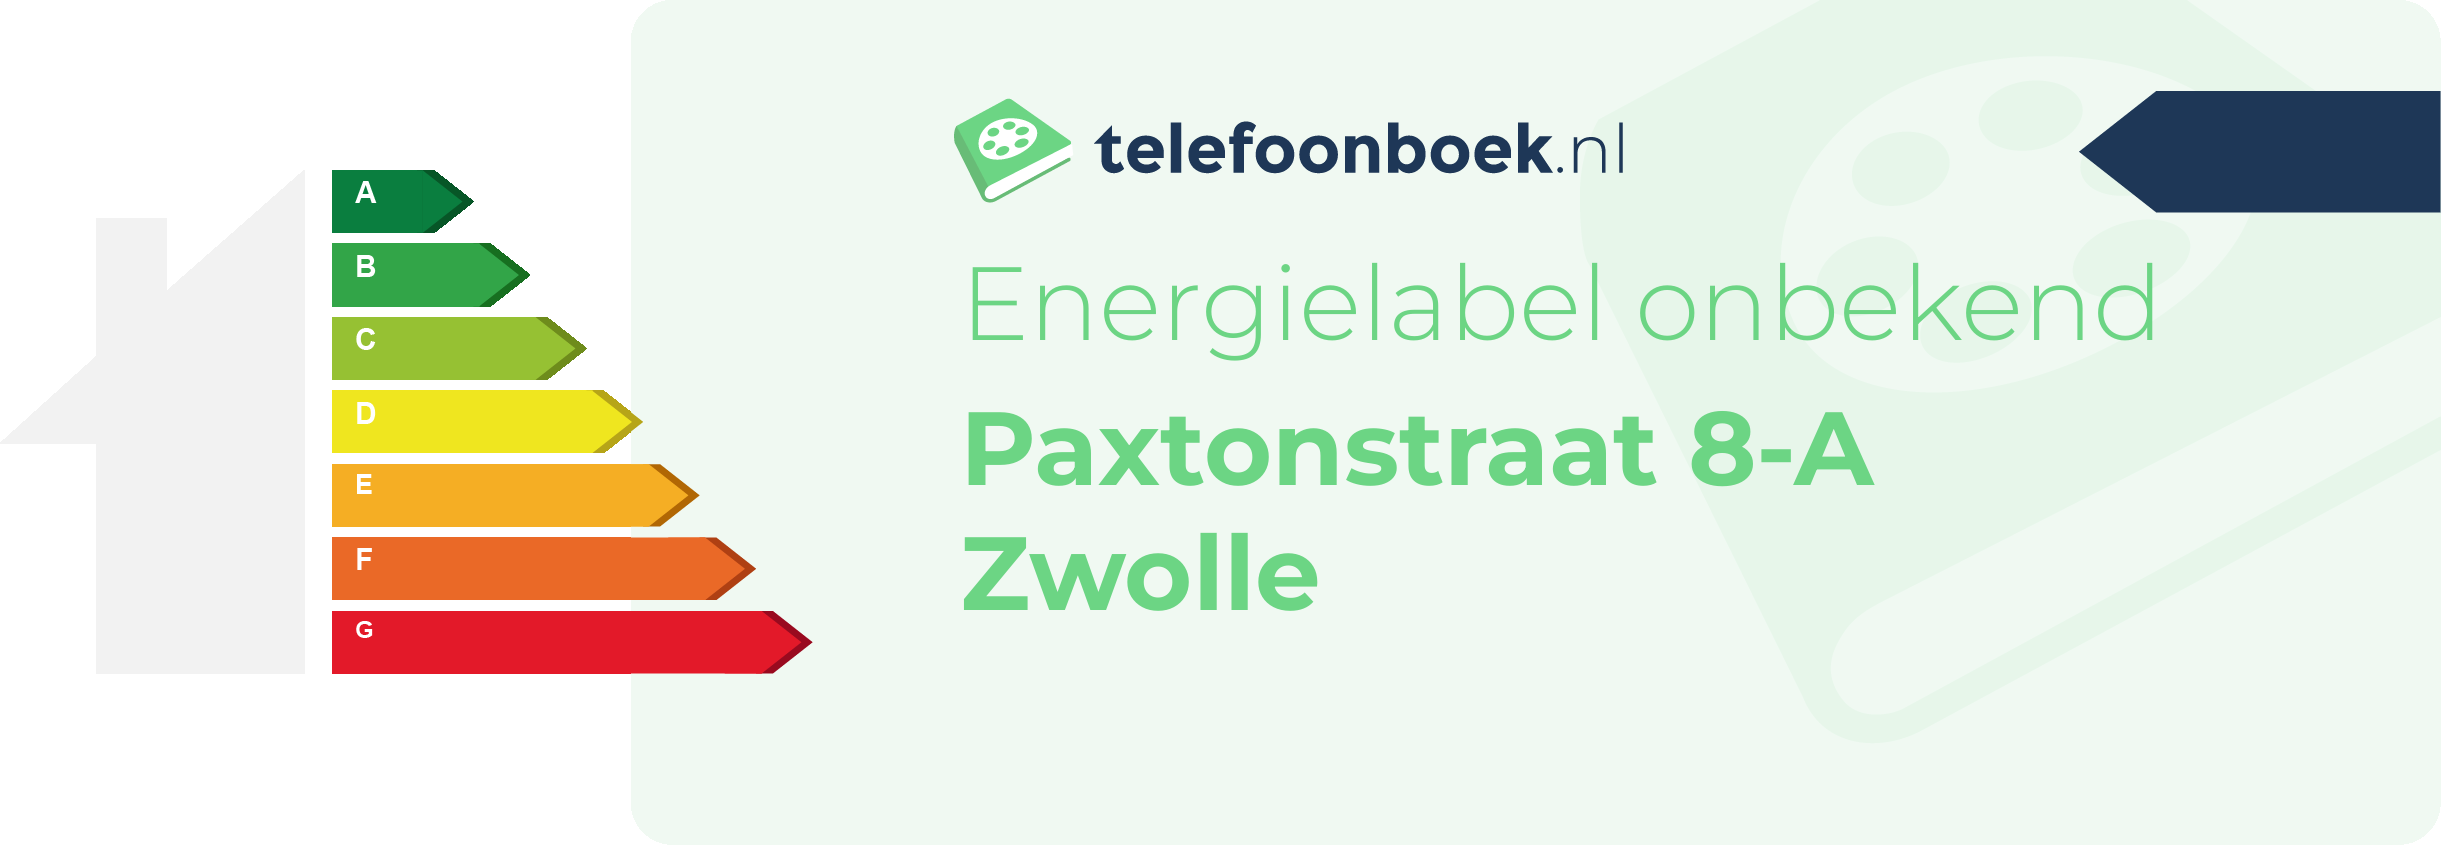 Energielabel Paxtonstraat 8-A Zwolle